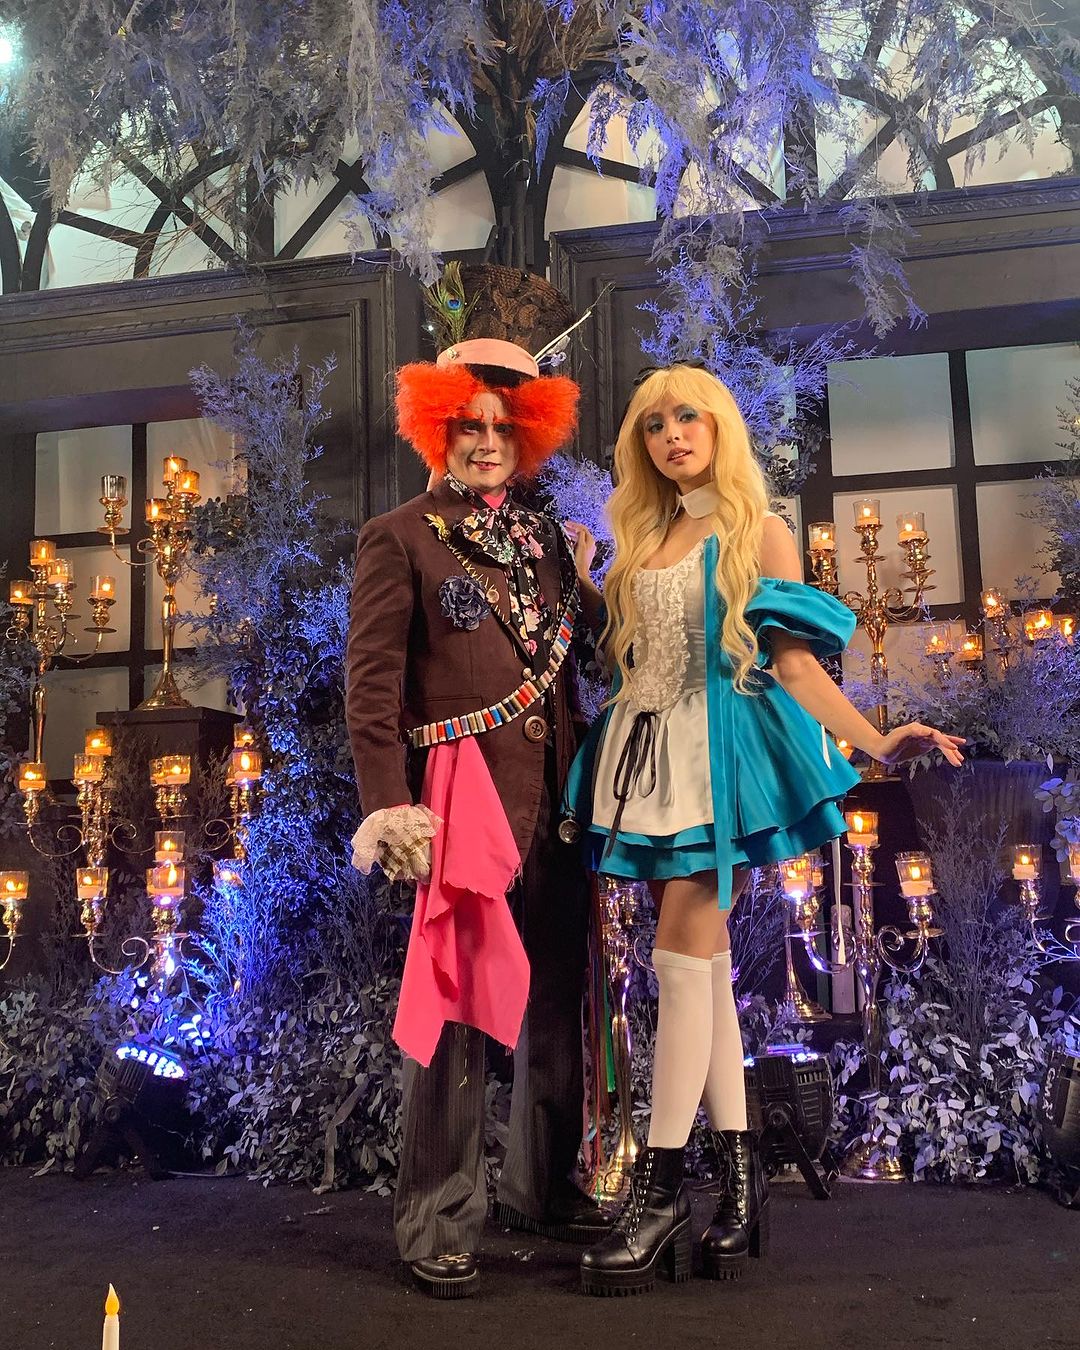 MIGUEL TANFELIX AND YSABEL ORTEGA AS MAD HATTER AND ALICE